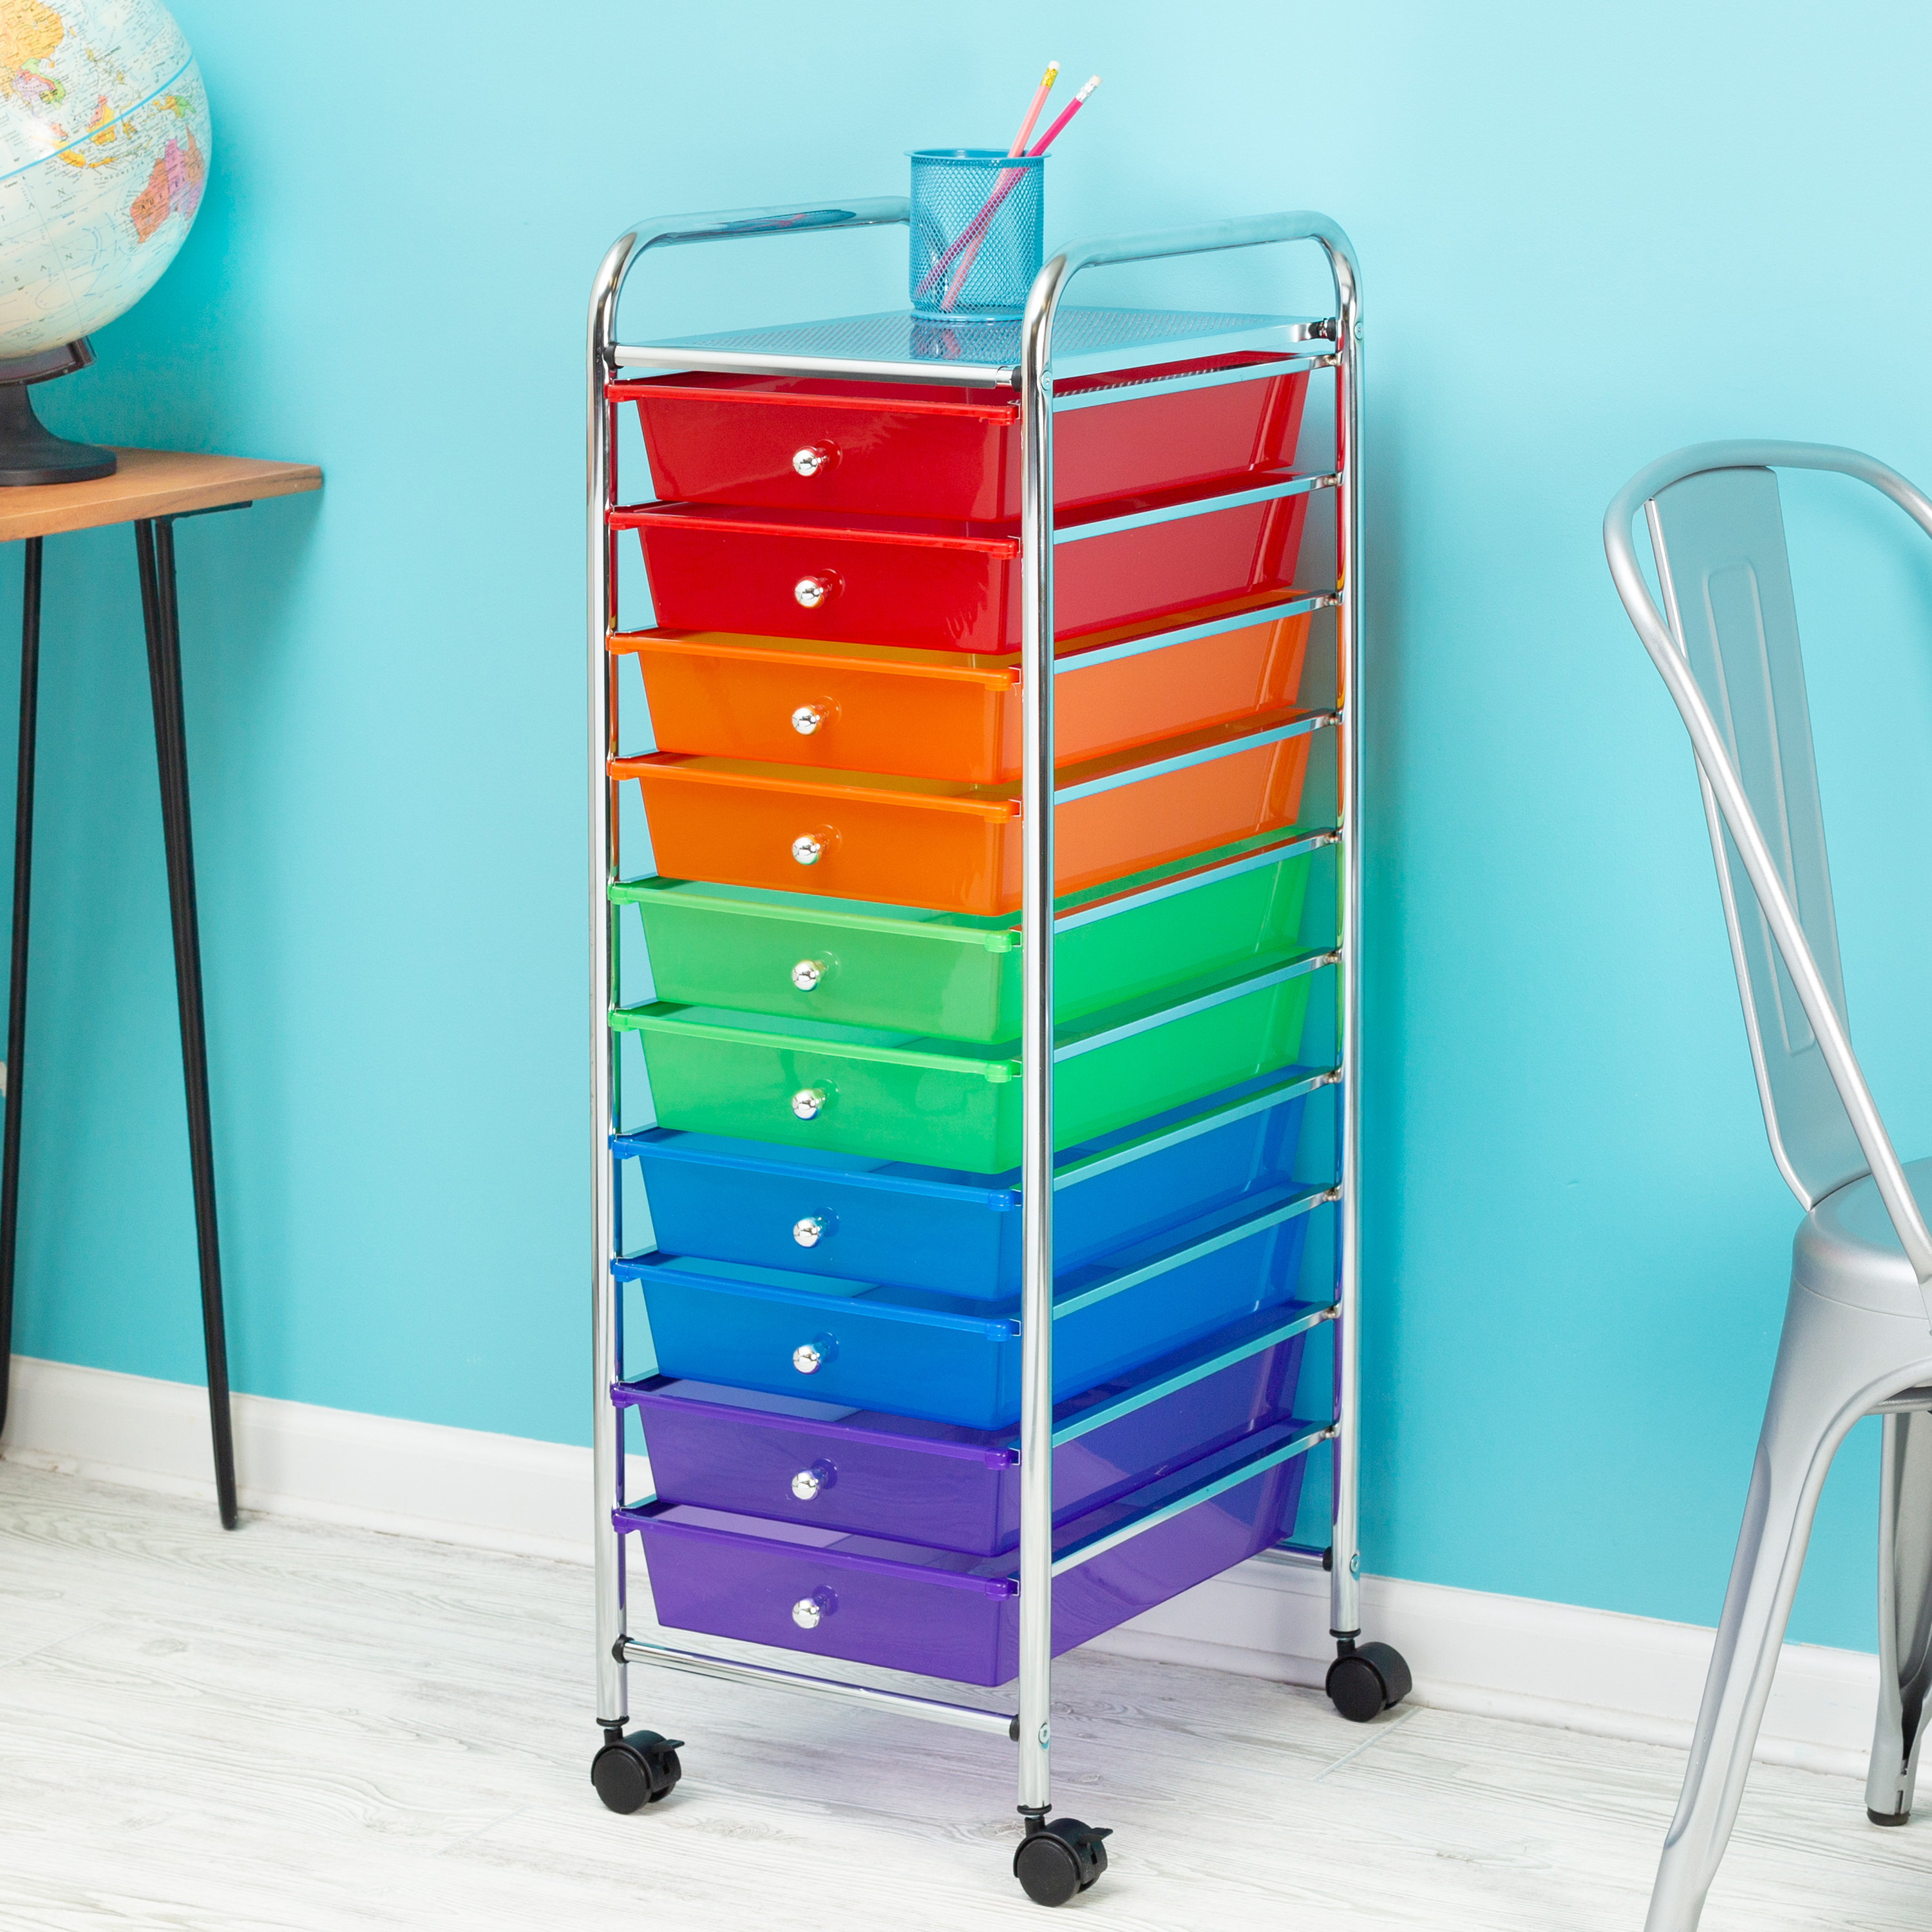 Honey-Can-Do 10-Drawer Multi-Color Rolling Cart, Rainbow - image 3 of 7